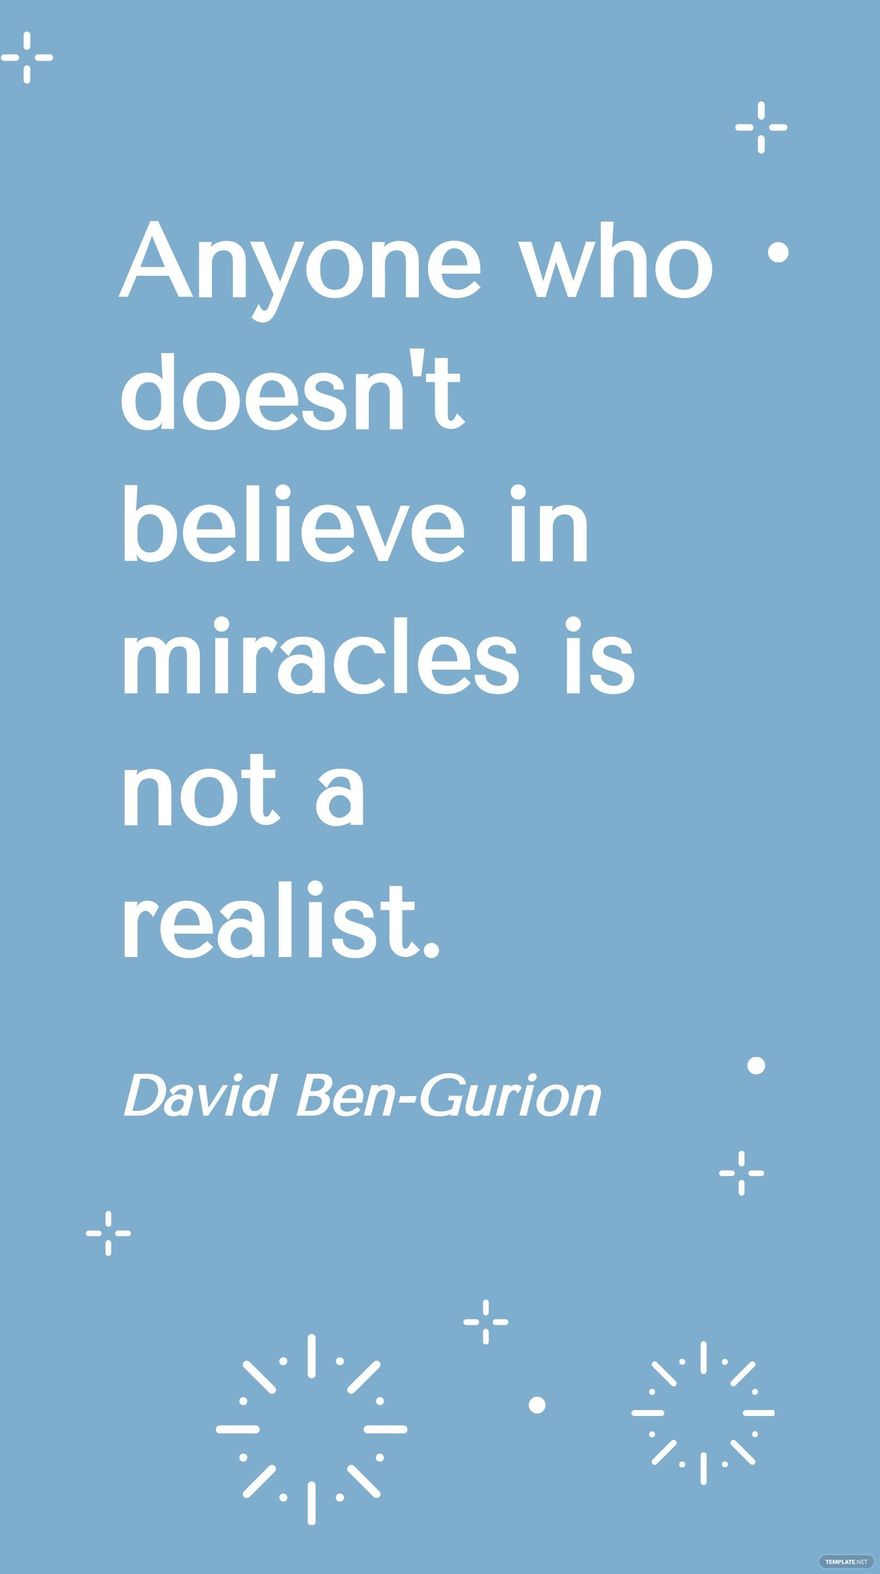 David Ben-Gurion - Anyone who doesn't believe in miracles is not a realist.